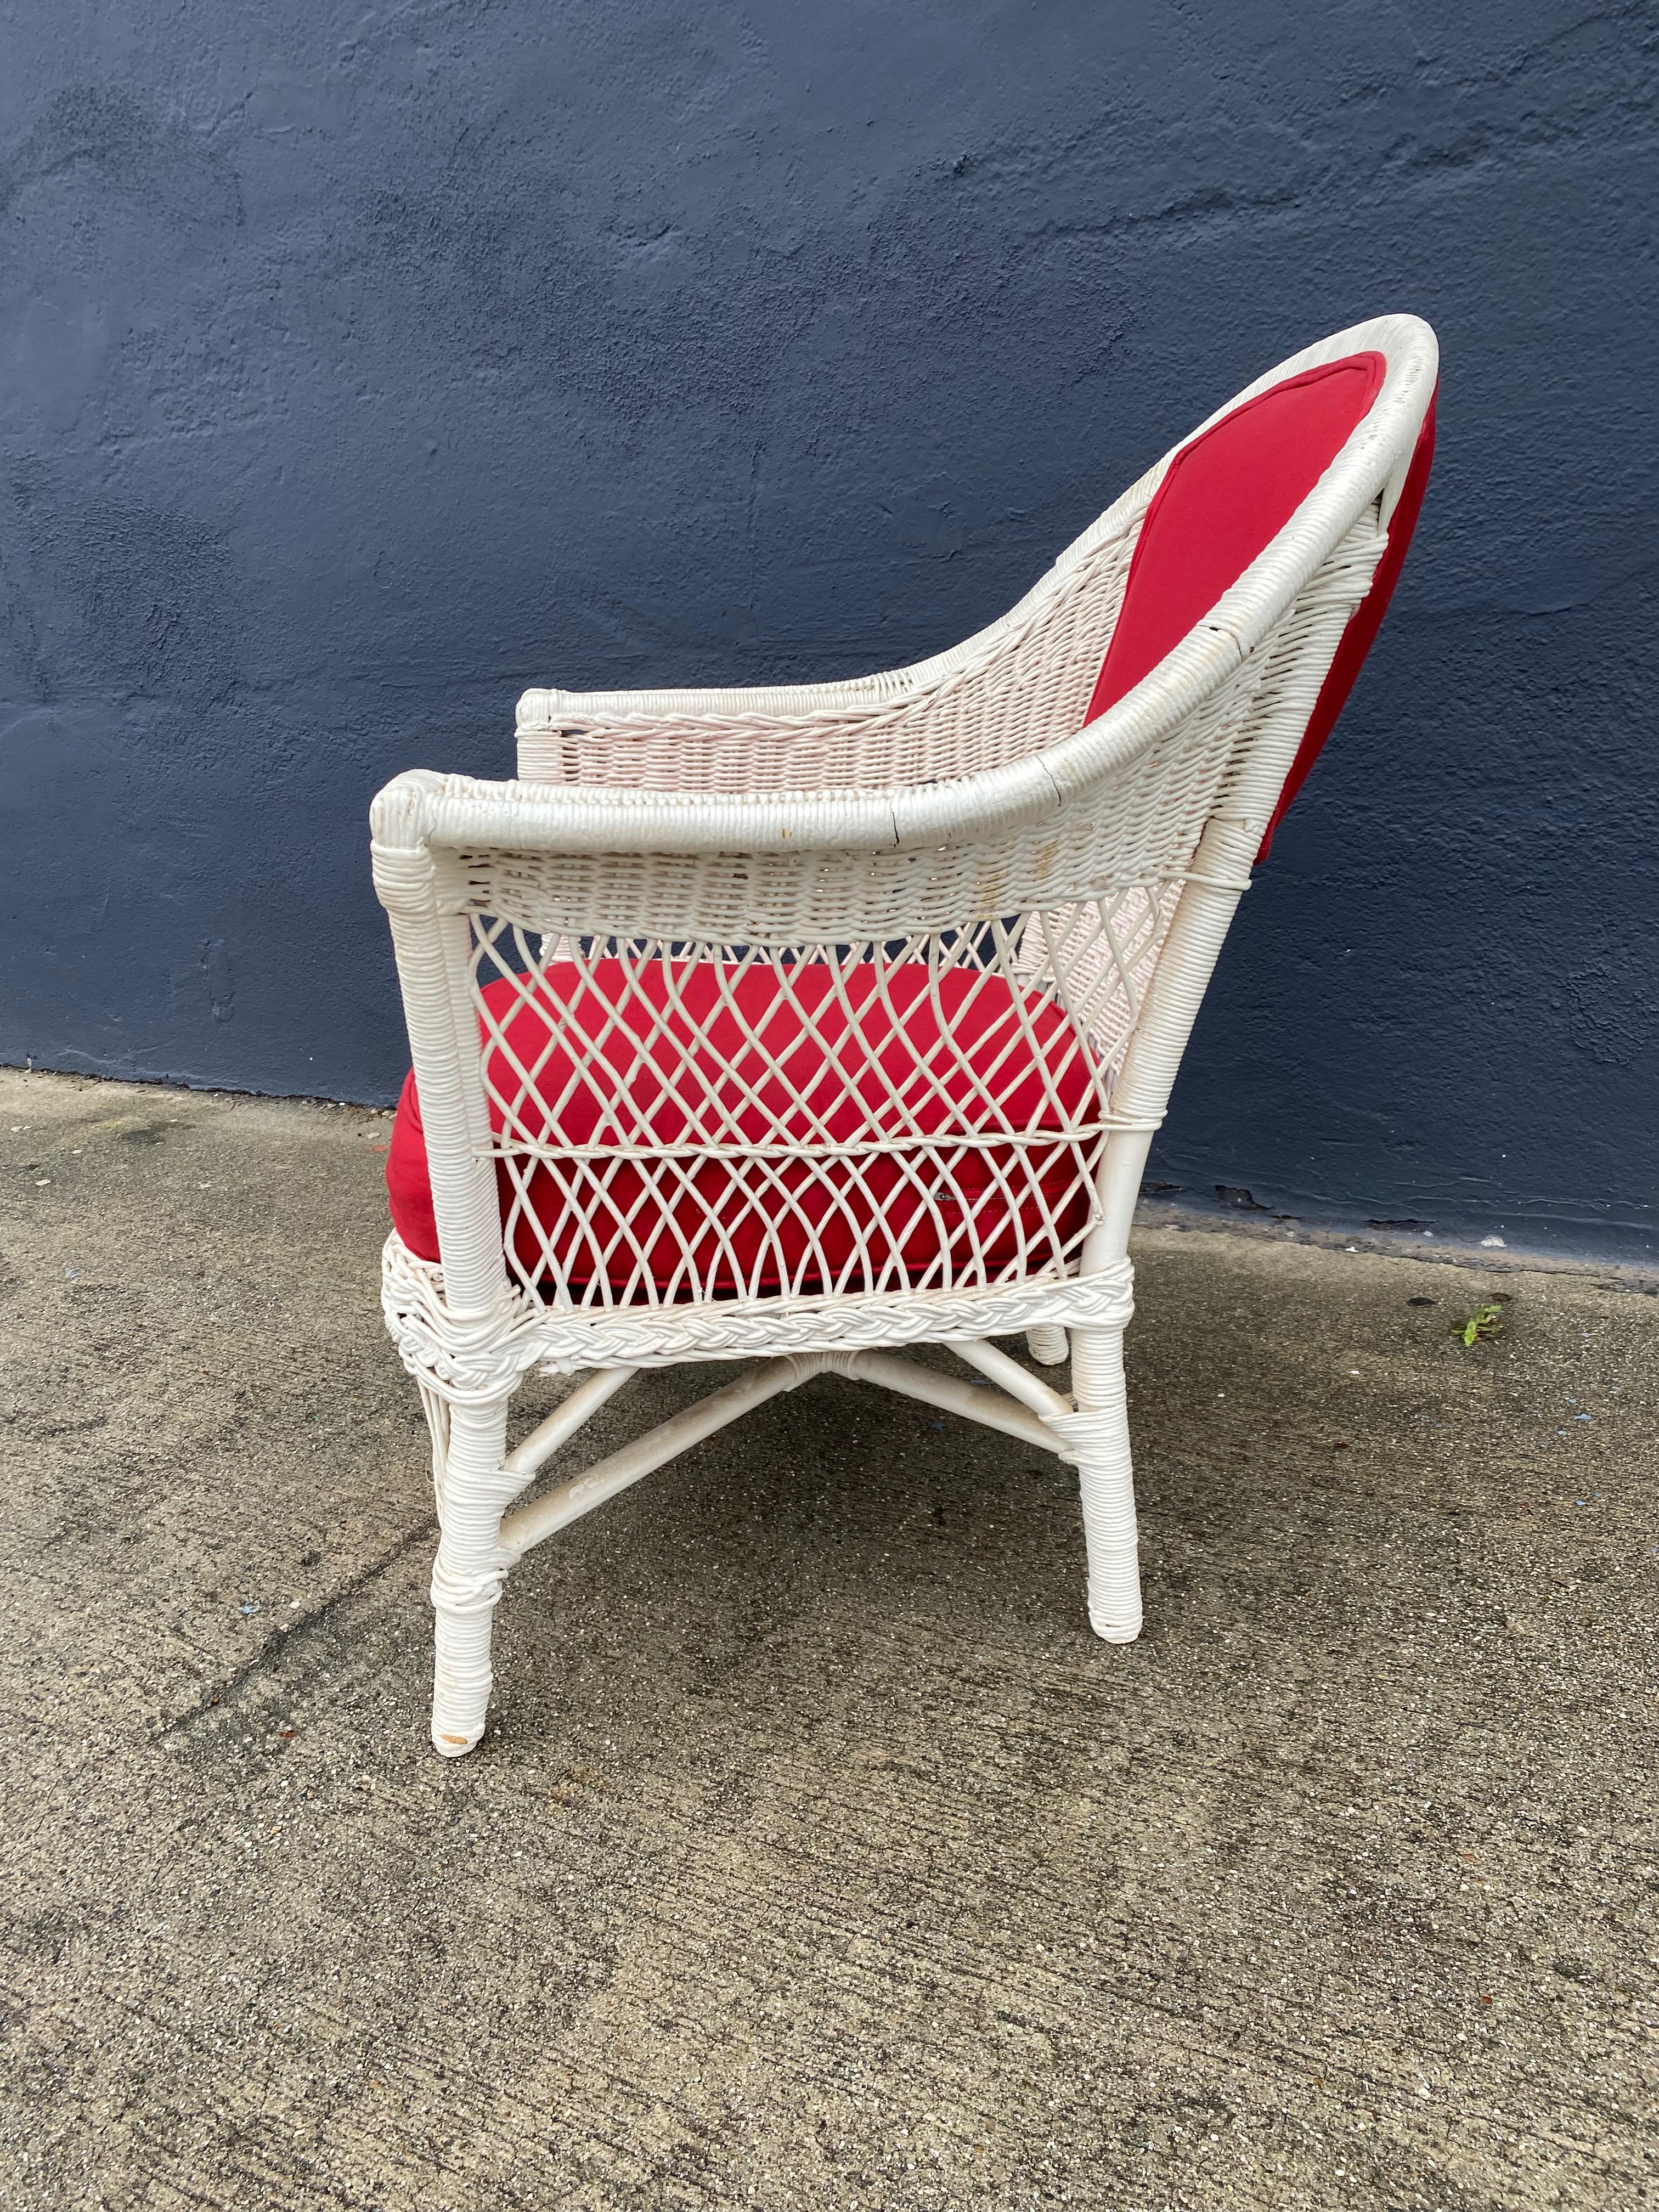 This is a classic Bar Harbor style wicker chair that dates to the first half of the twentieth century. The chair was reupholstered in a cherry red fabric and repainted at some point in the late twentieth century. The chair is in very good condition;